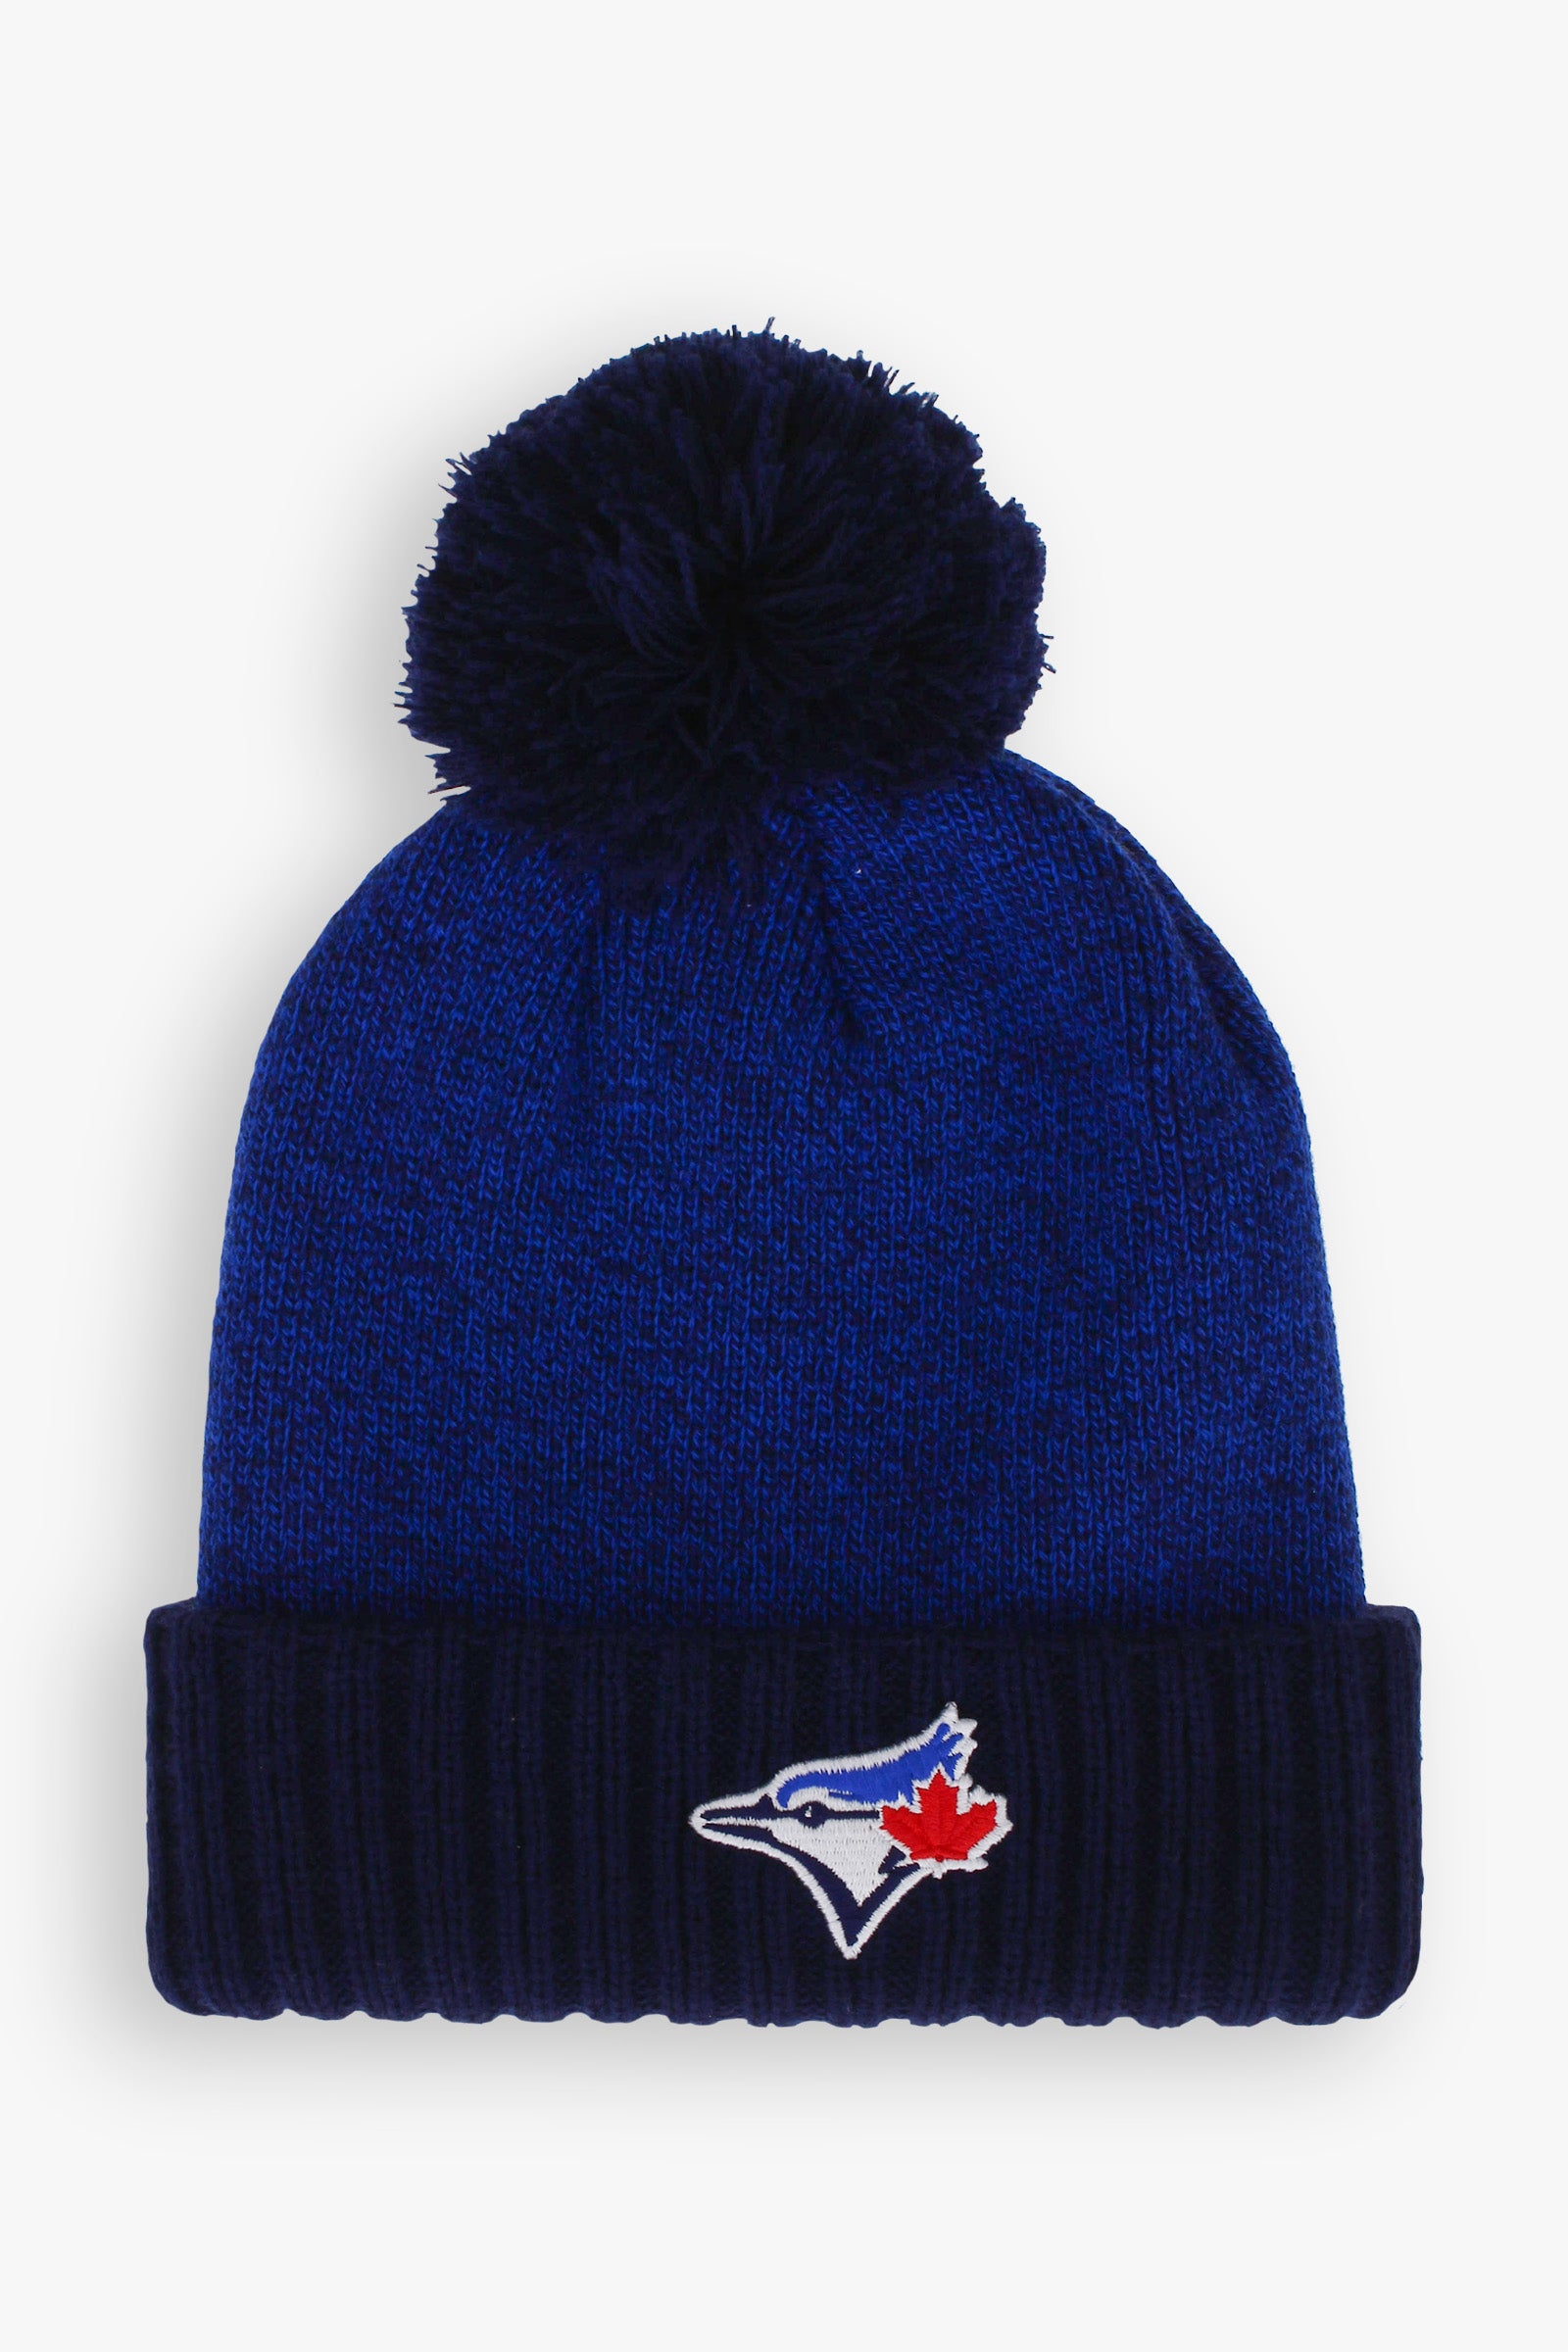 MLB Toronto Blue Jays Adult Men's Heavy Knit Pom Toque With 3D Embroidered Logo